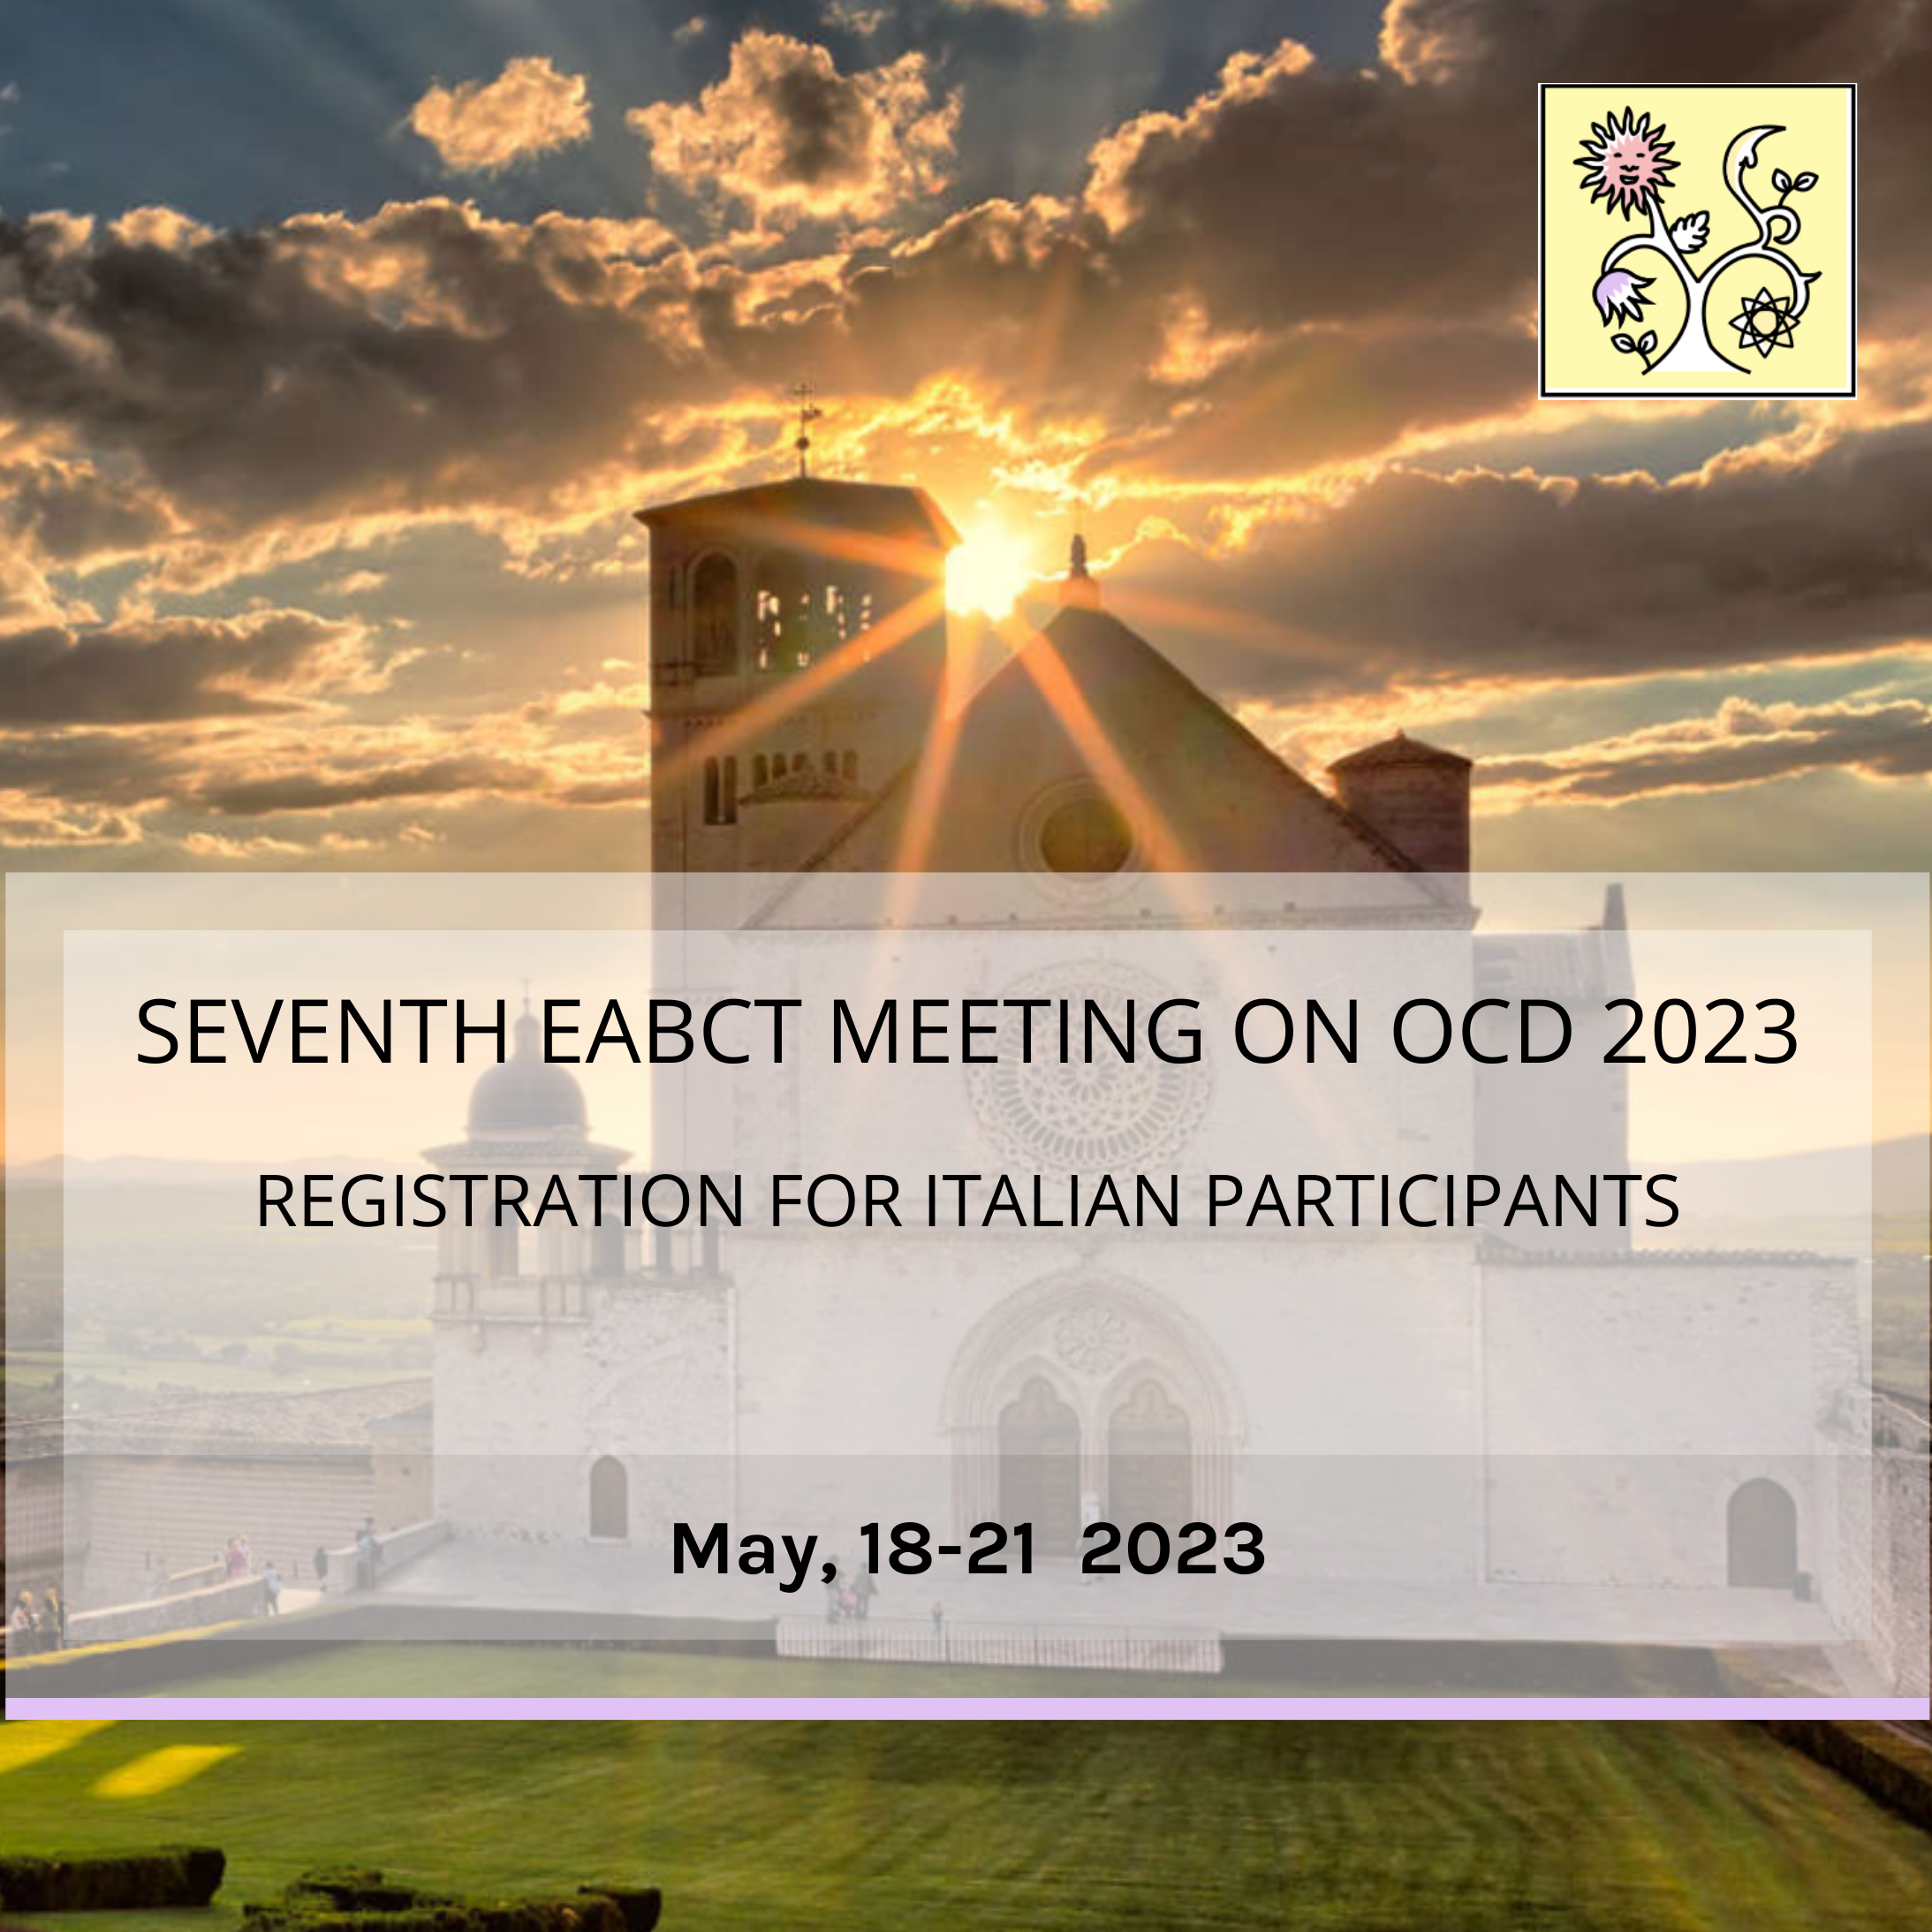 REGISTRATION FOR ITALIAN PARTICIPANTS  -  SEVENTH EABCT SIG MEETING ON OCD 2023